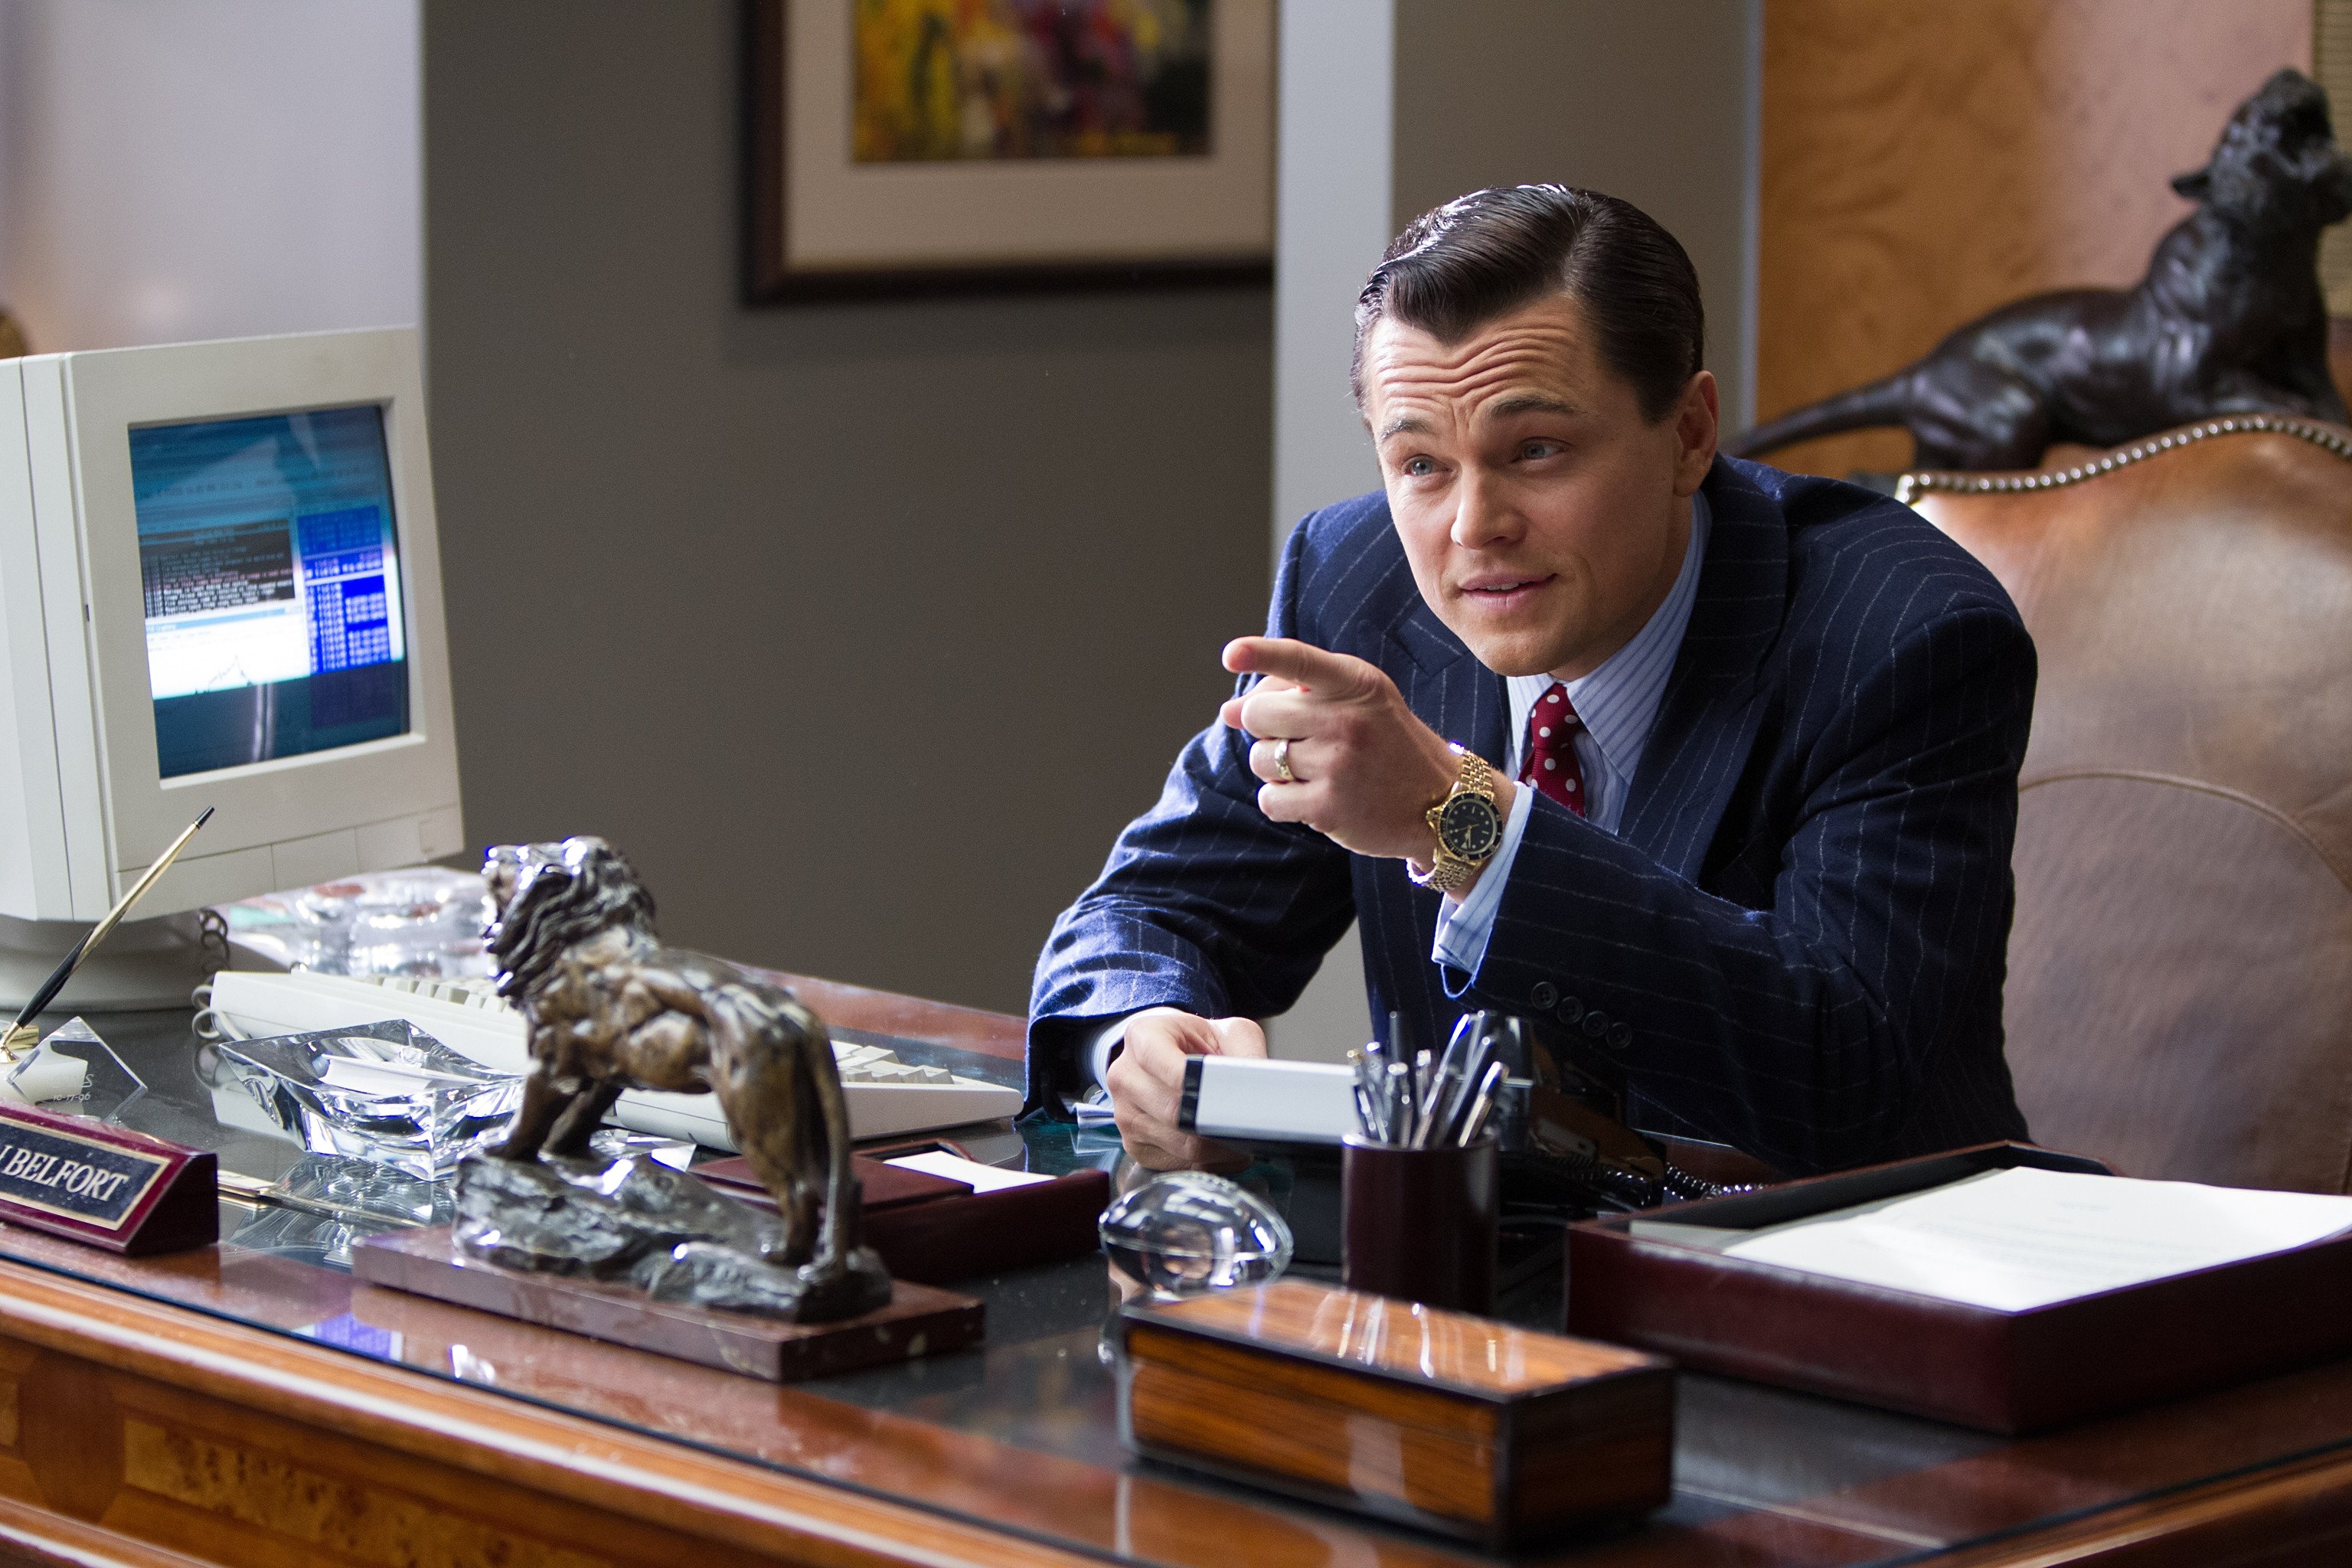 Still of the movie The Wolf of Wall Street, directed by Martin Scorsese, starring Leonardo DiCaprio. 48 Hours Magazine, Film Feature, 13FEB2014